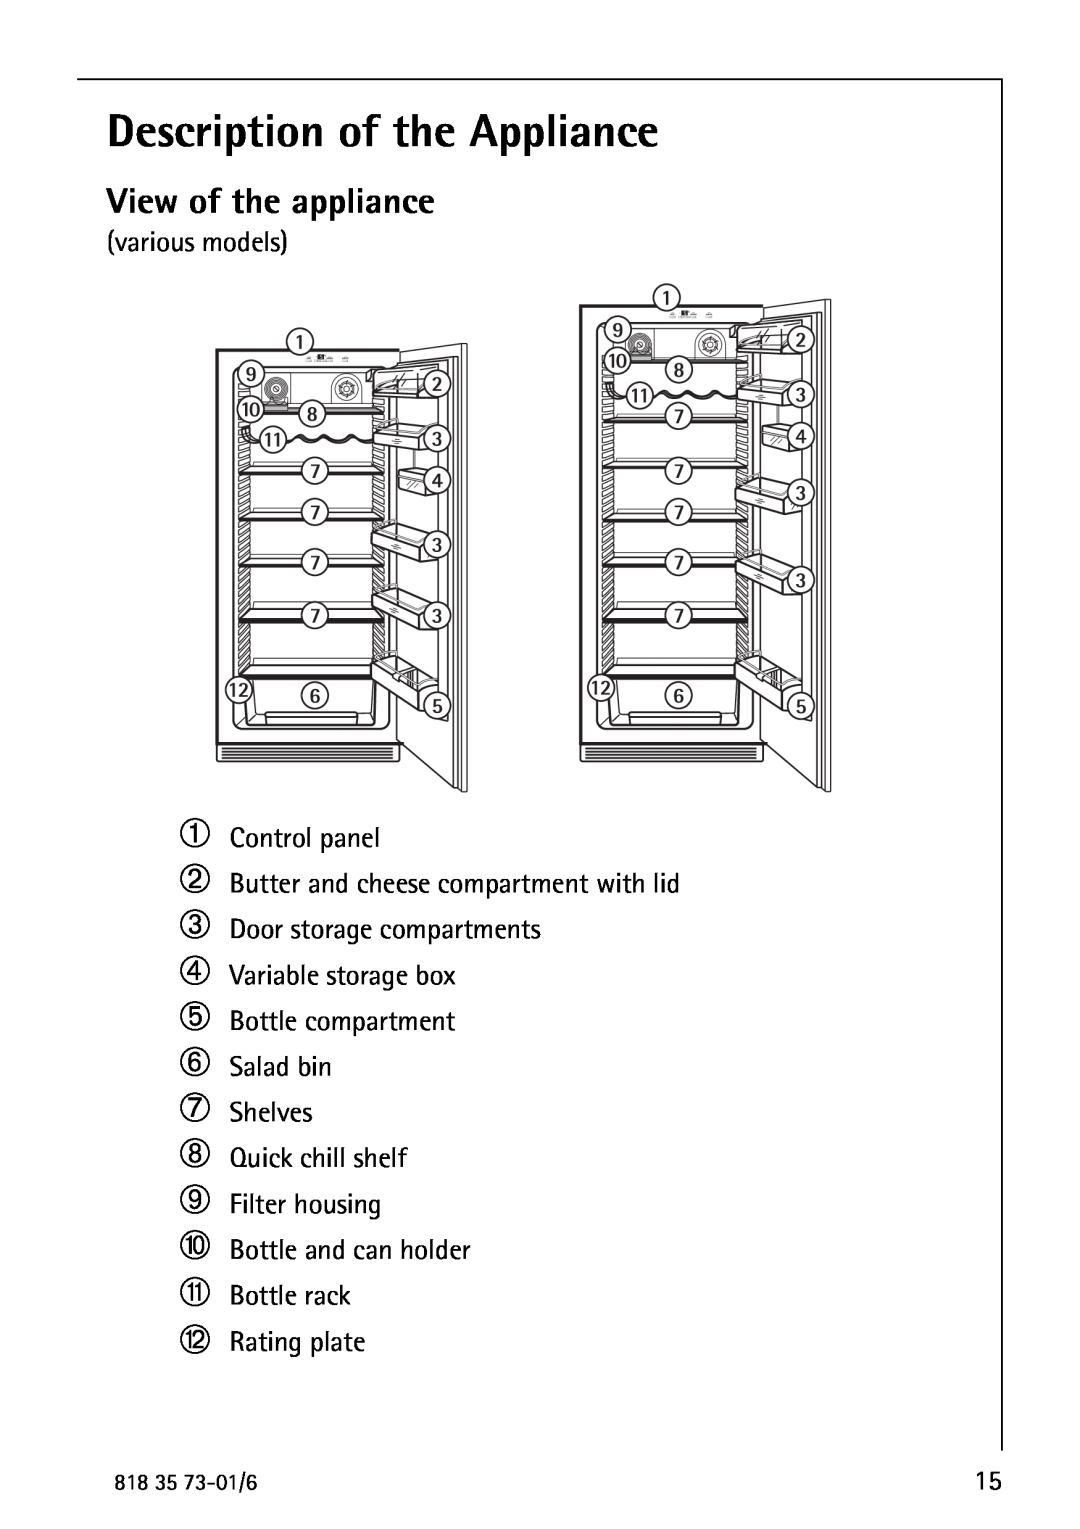 Electrolux SANTO 72340 KA operating instructions Description of the Appliance, View of the appliance 